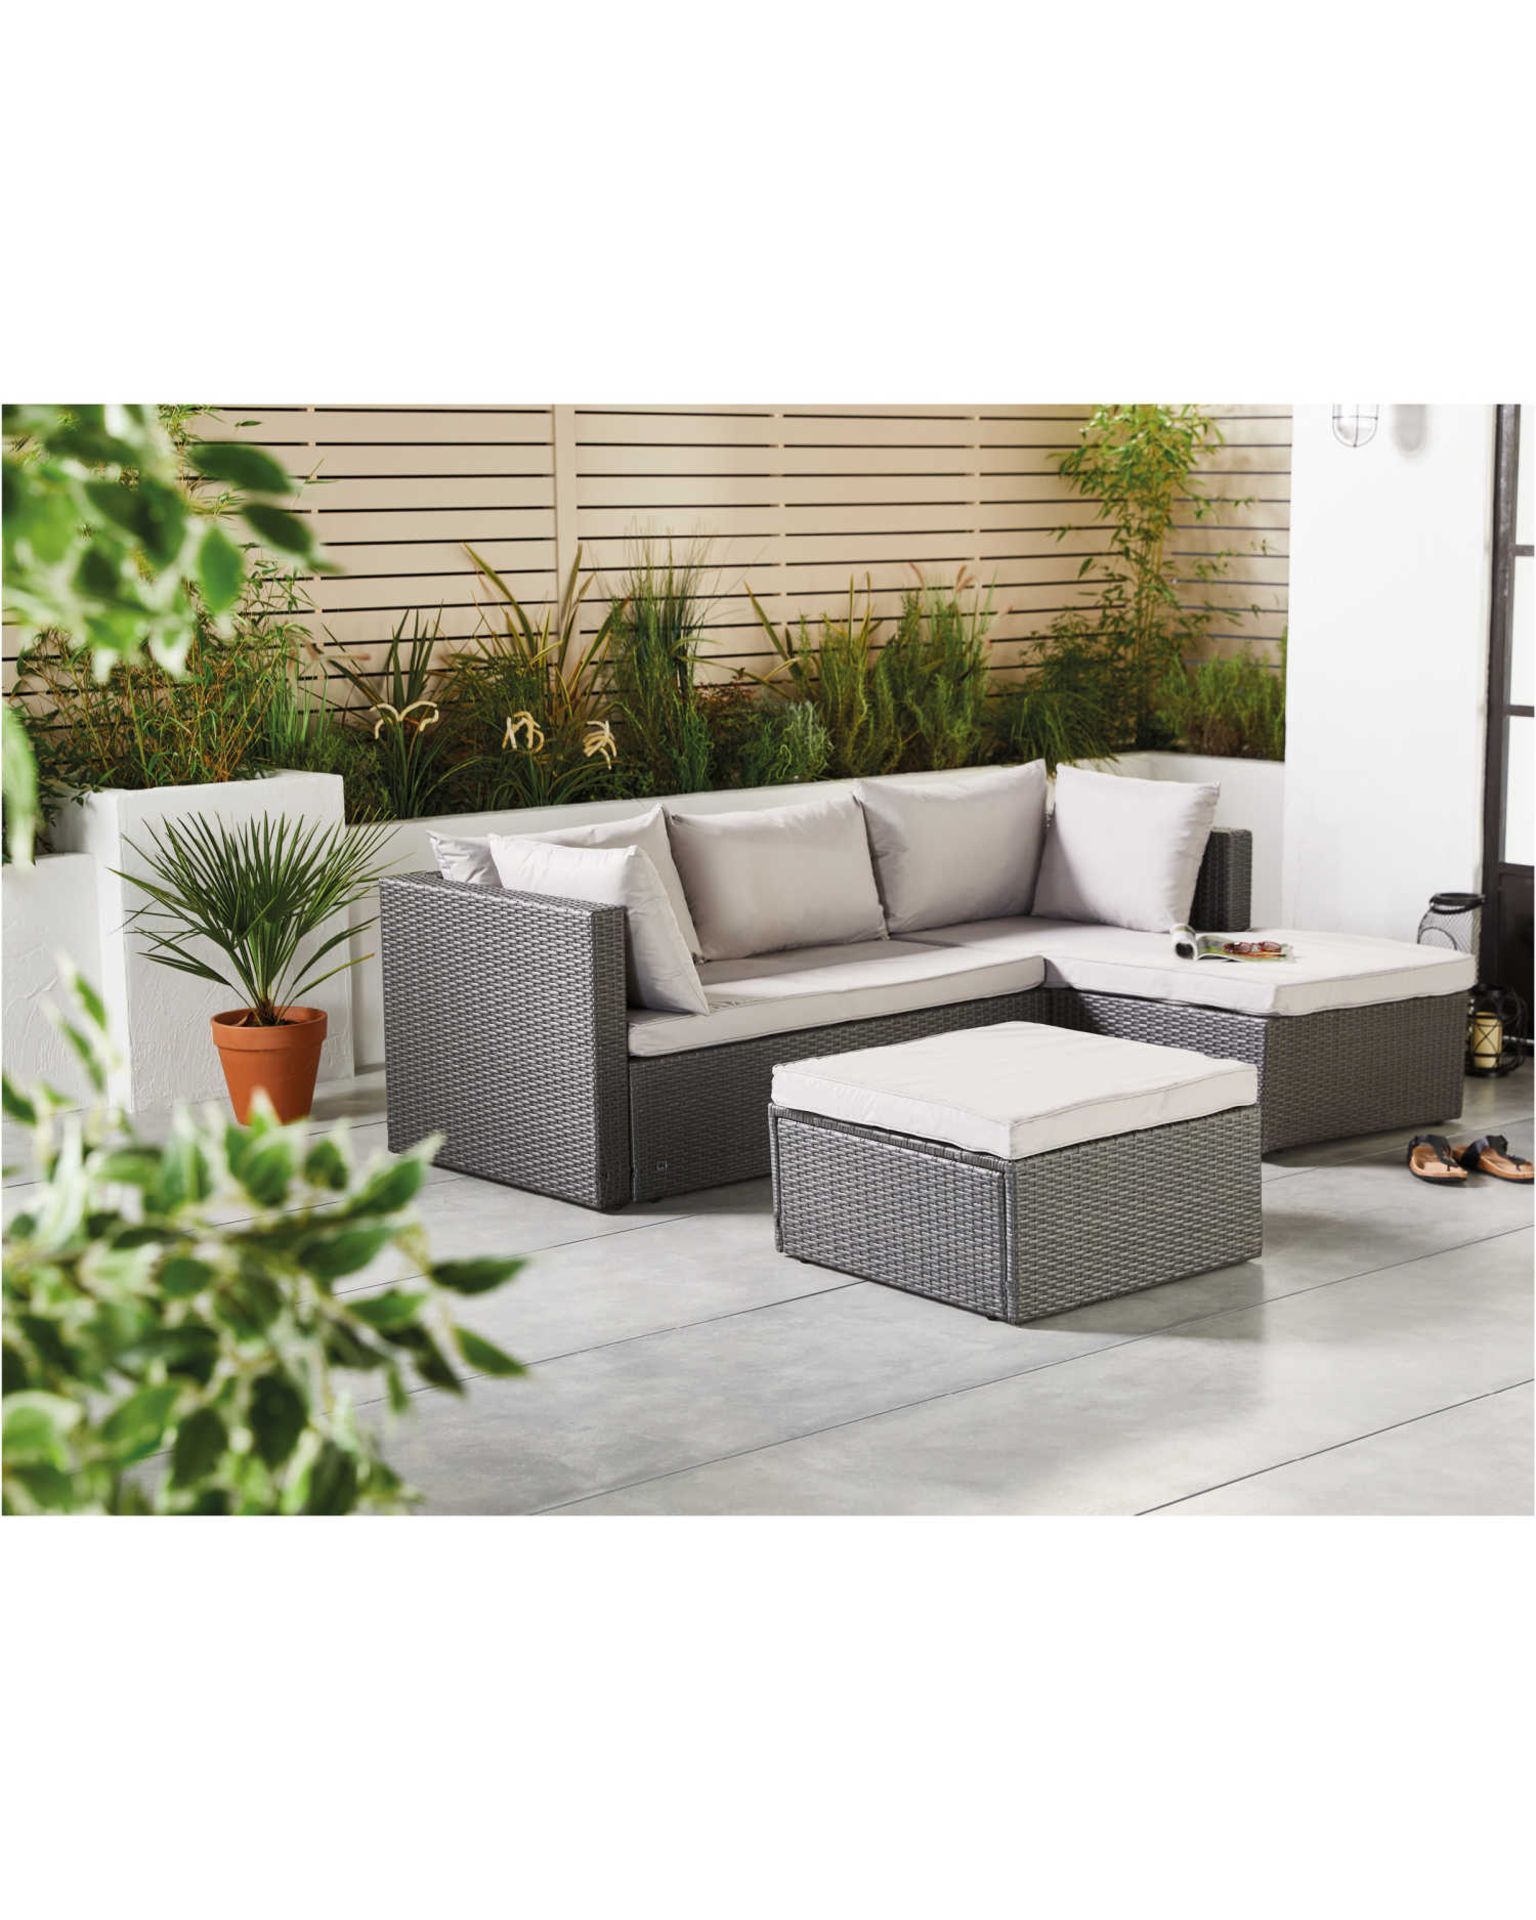 TRADE LOT 4 X New & Boxed Luxury Grey and cream Corner Sofa Set. Soak in the sun and feel that summ